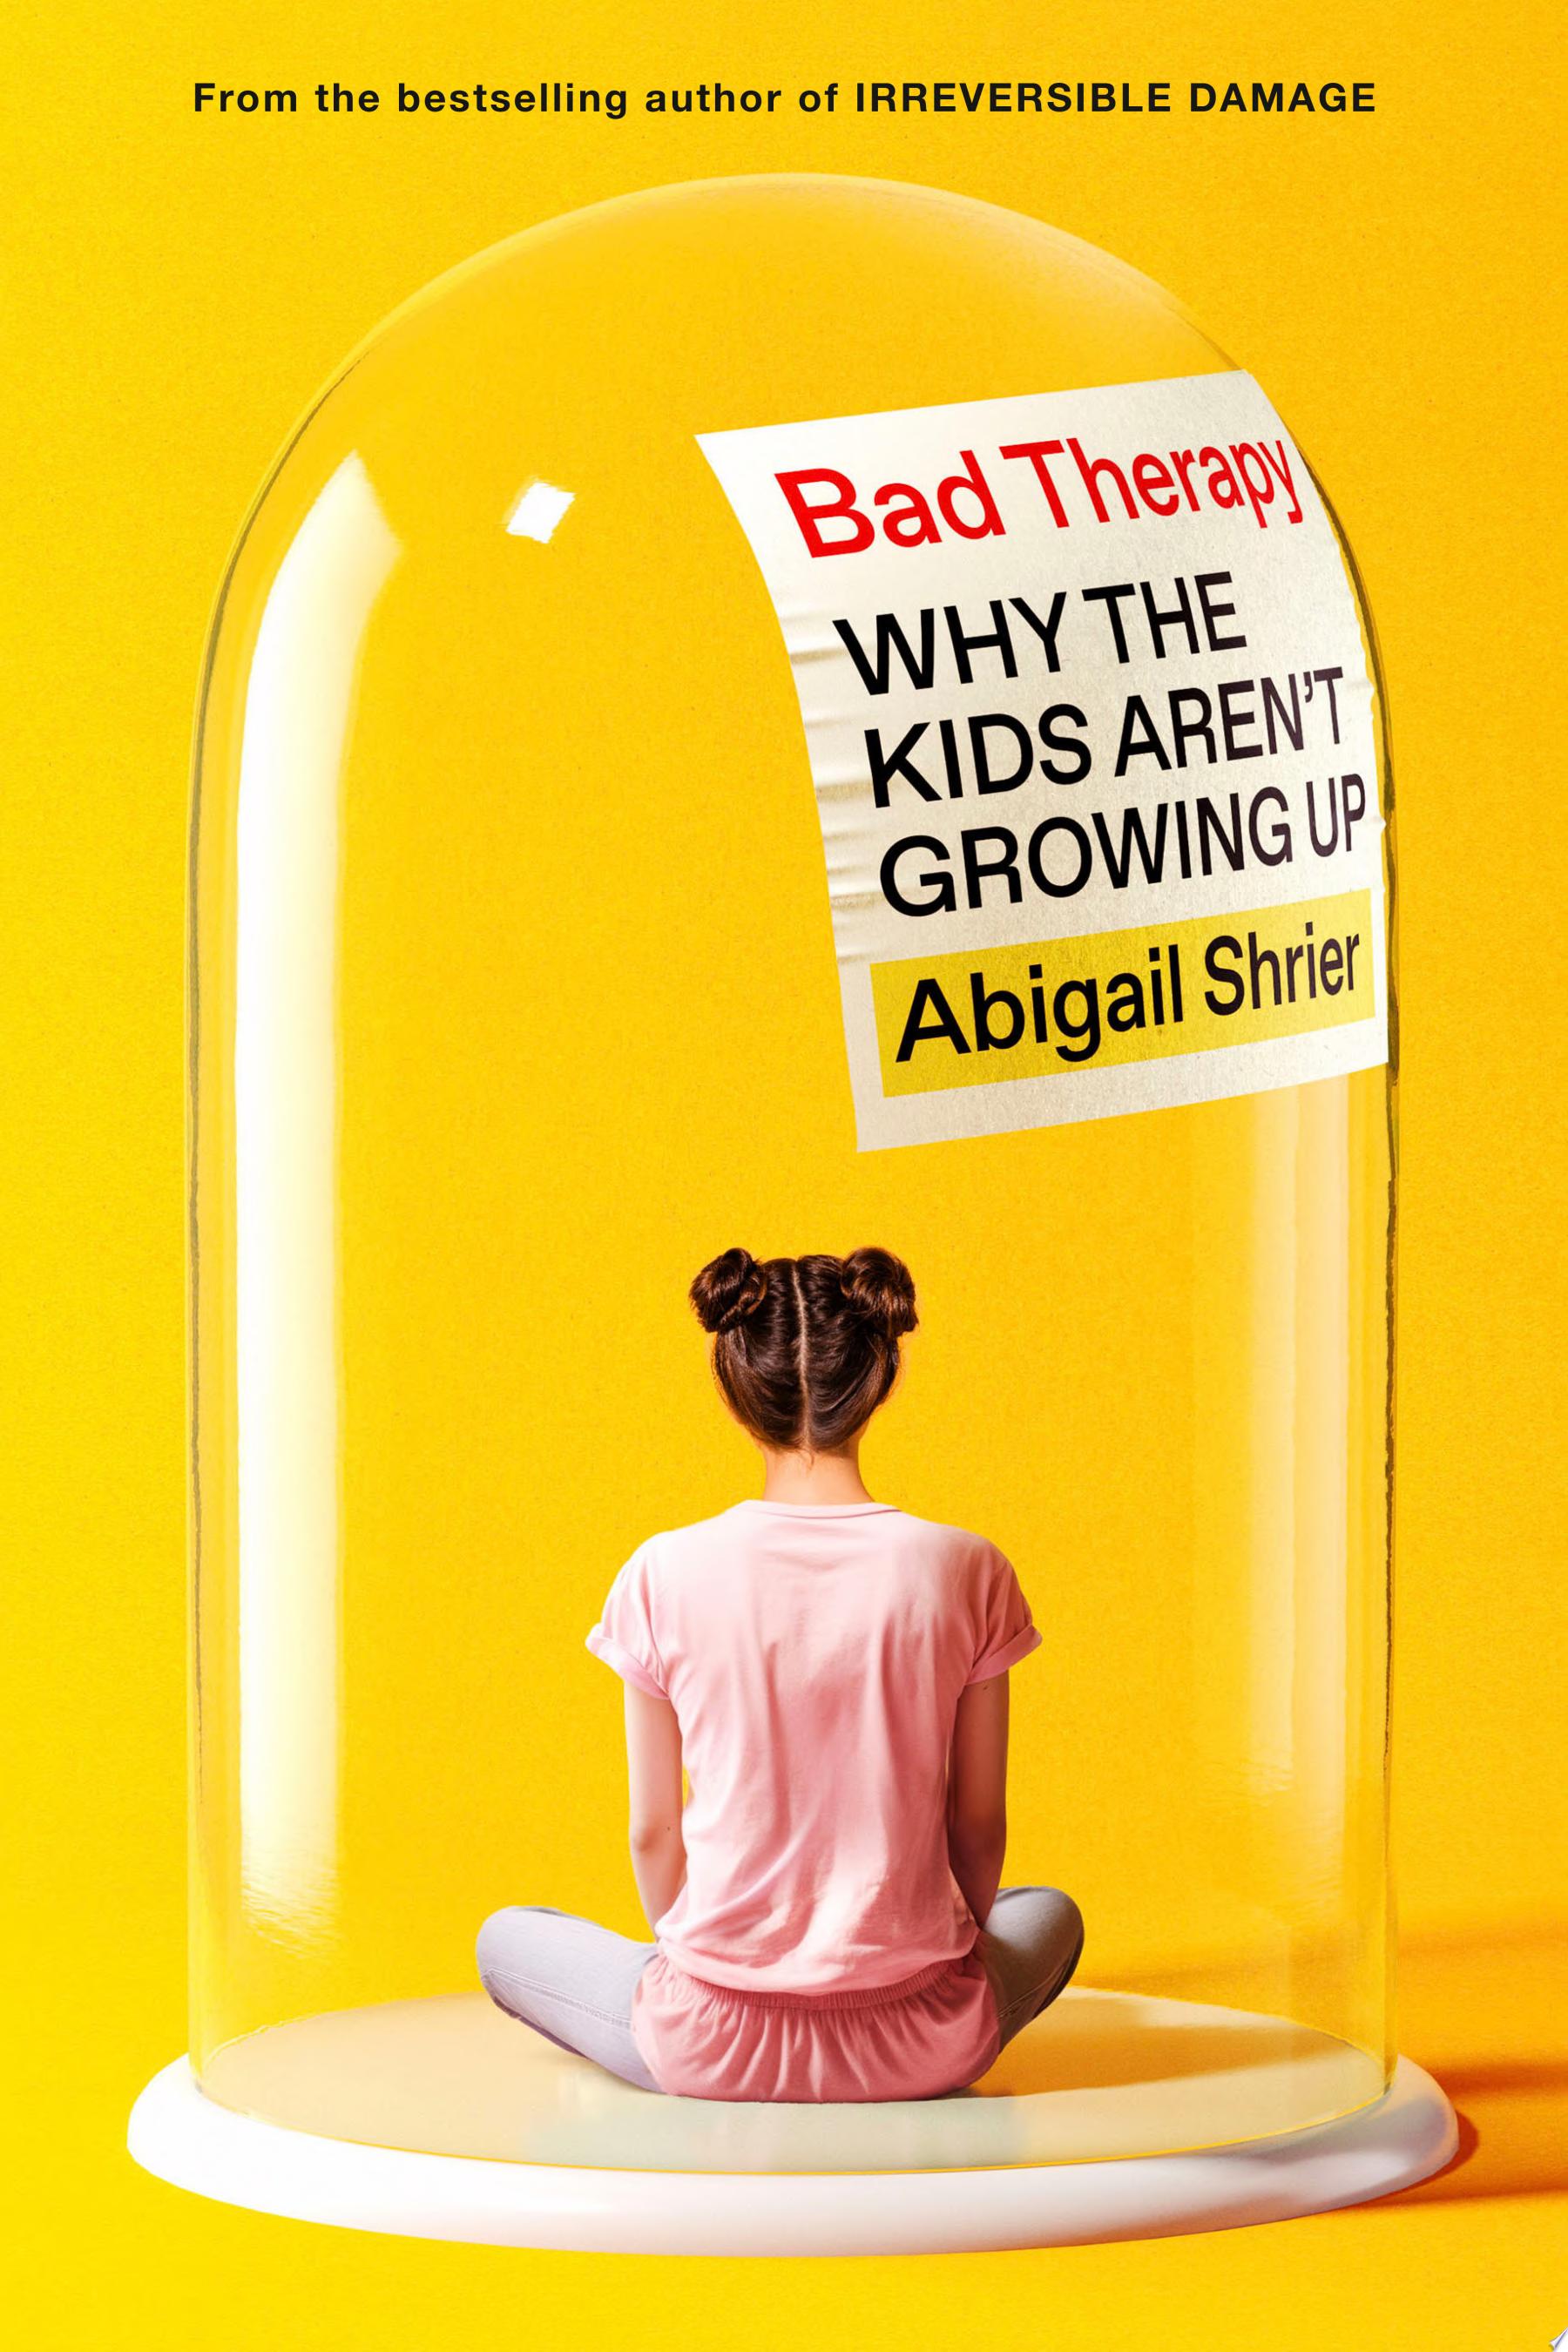 Image for "Bad Therapy"